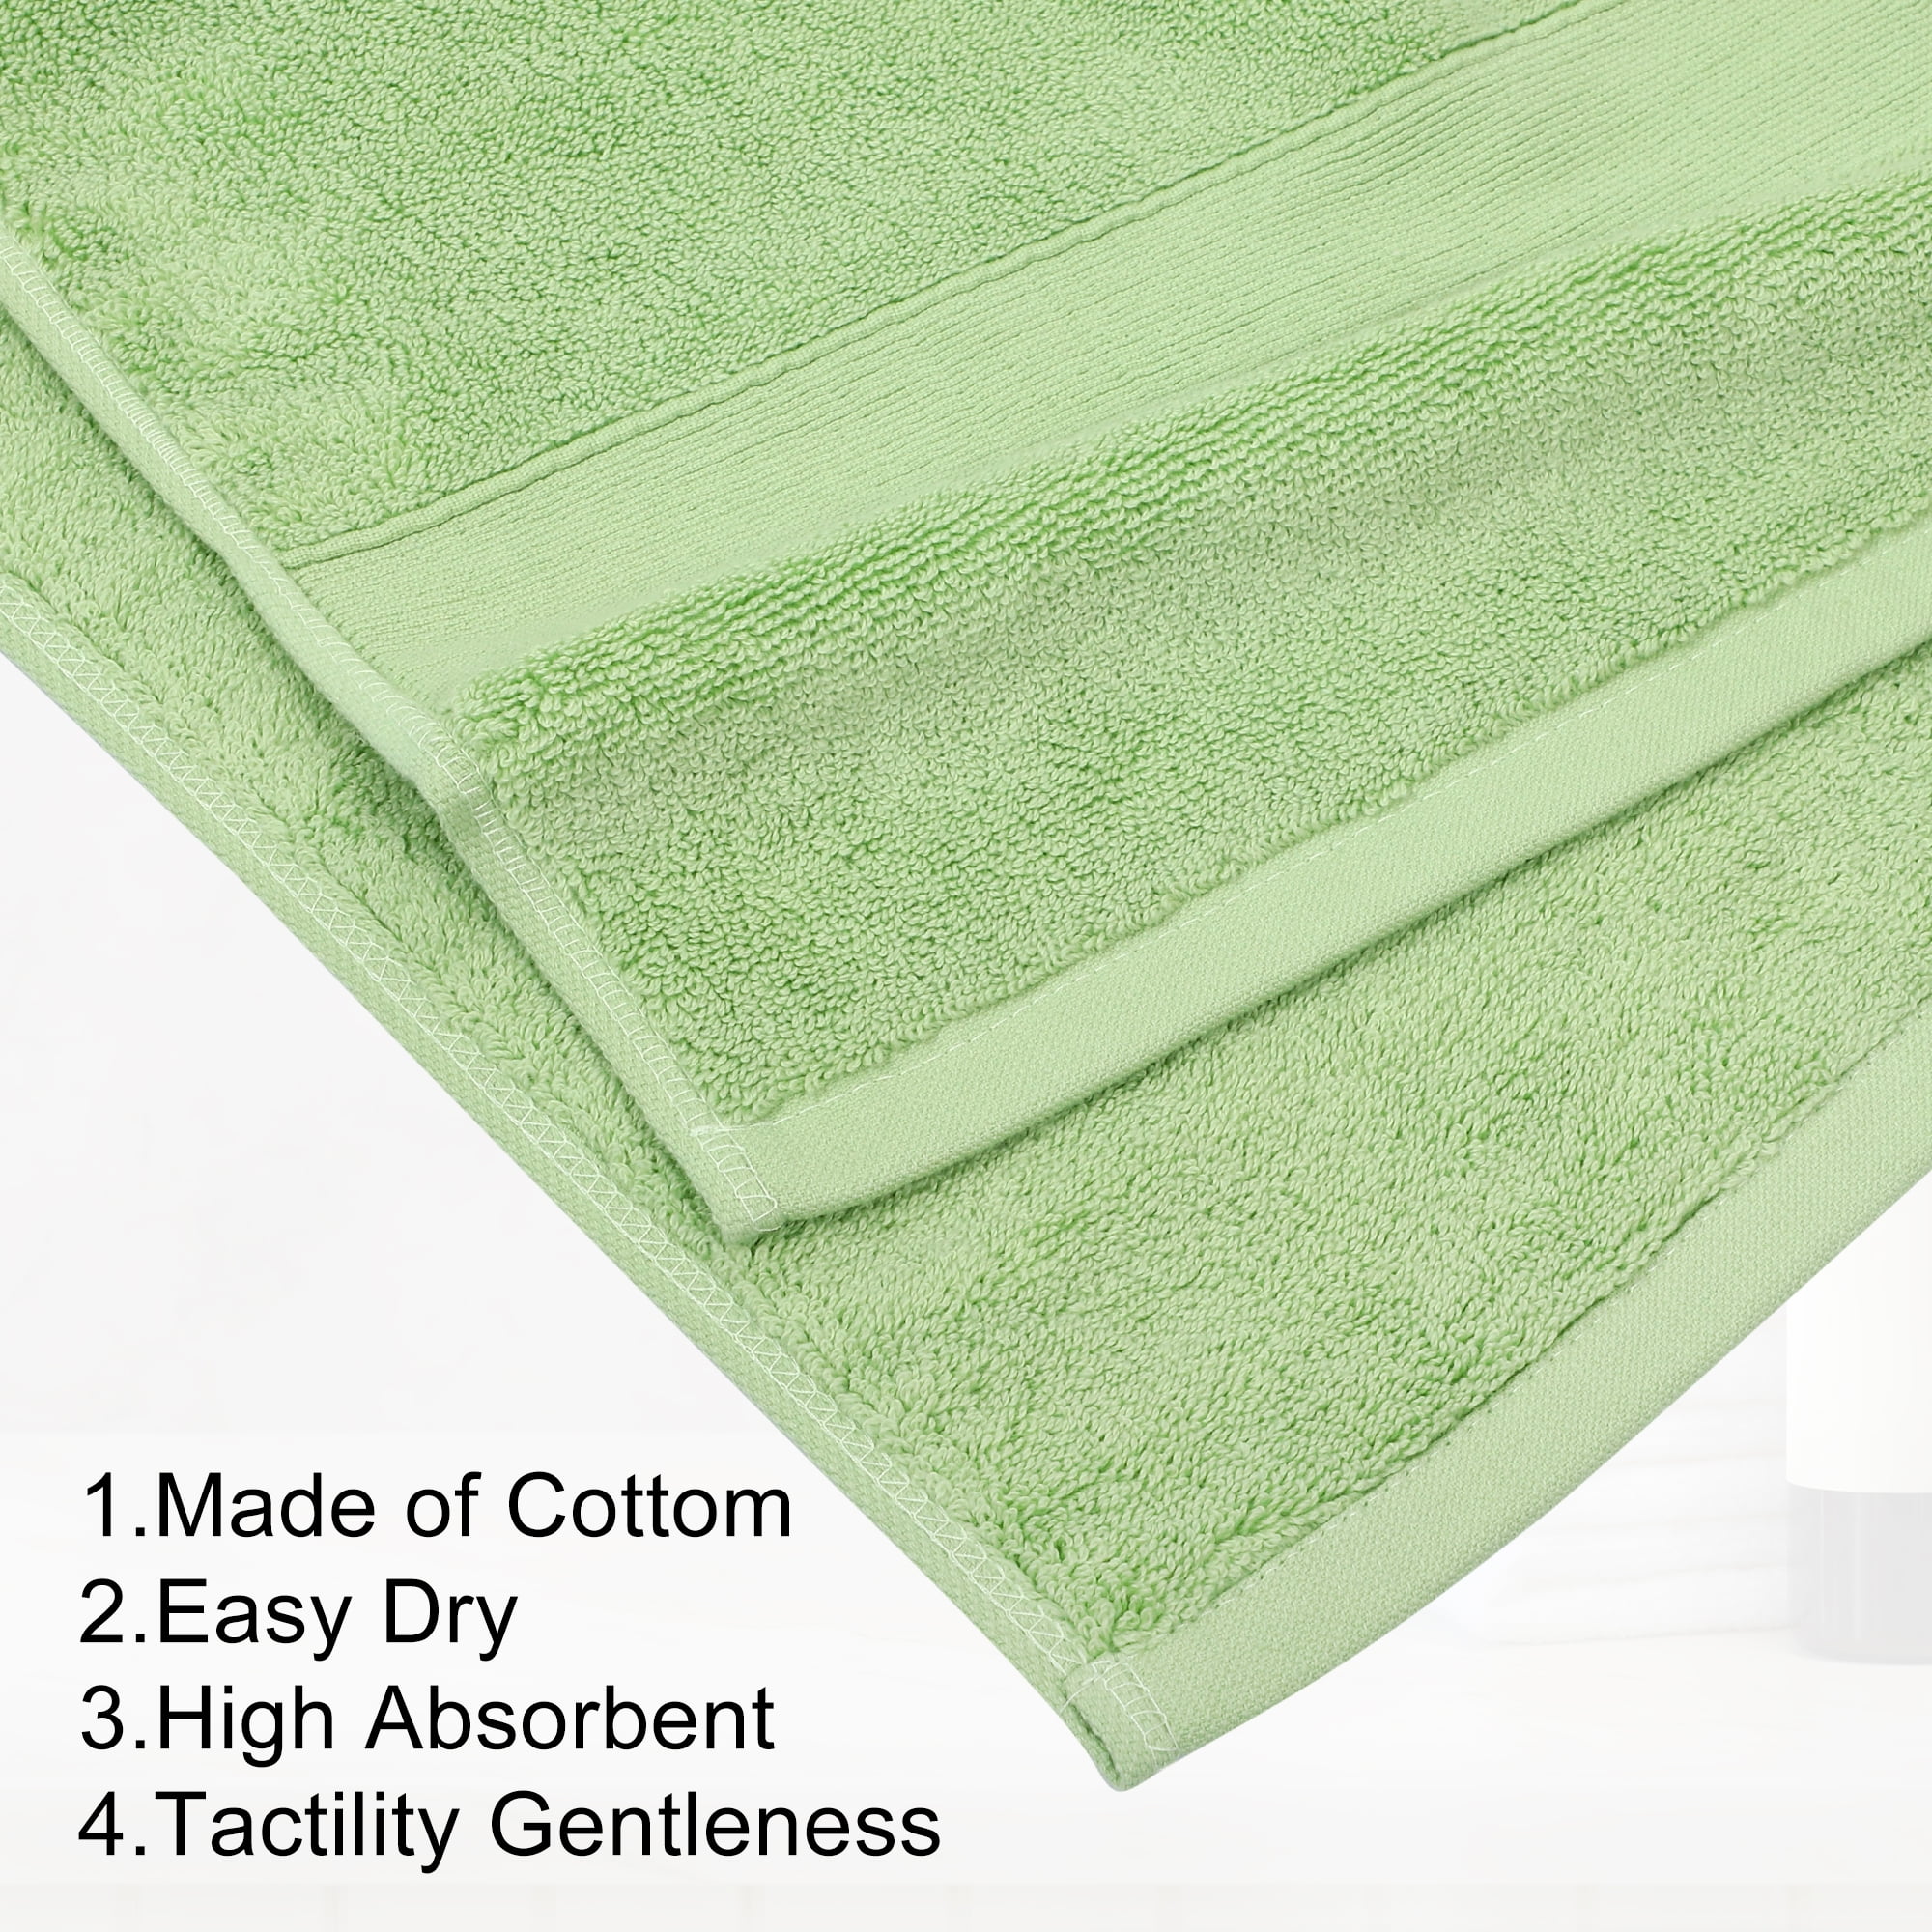 These Soft Cotton Bath Towels Are on Sale for $5 Apiece at